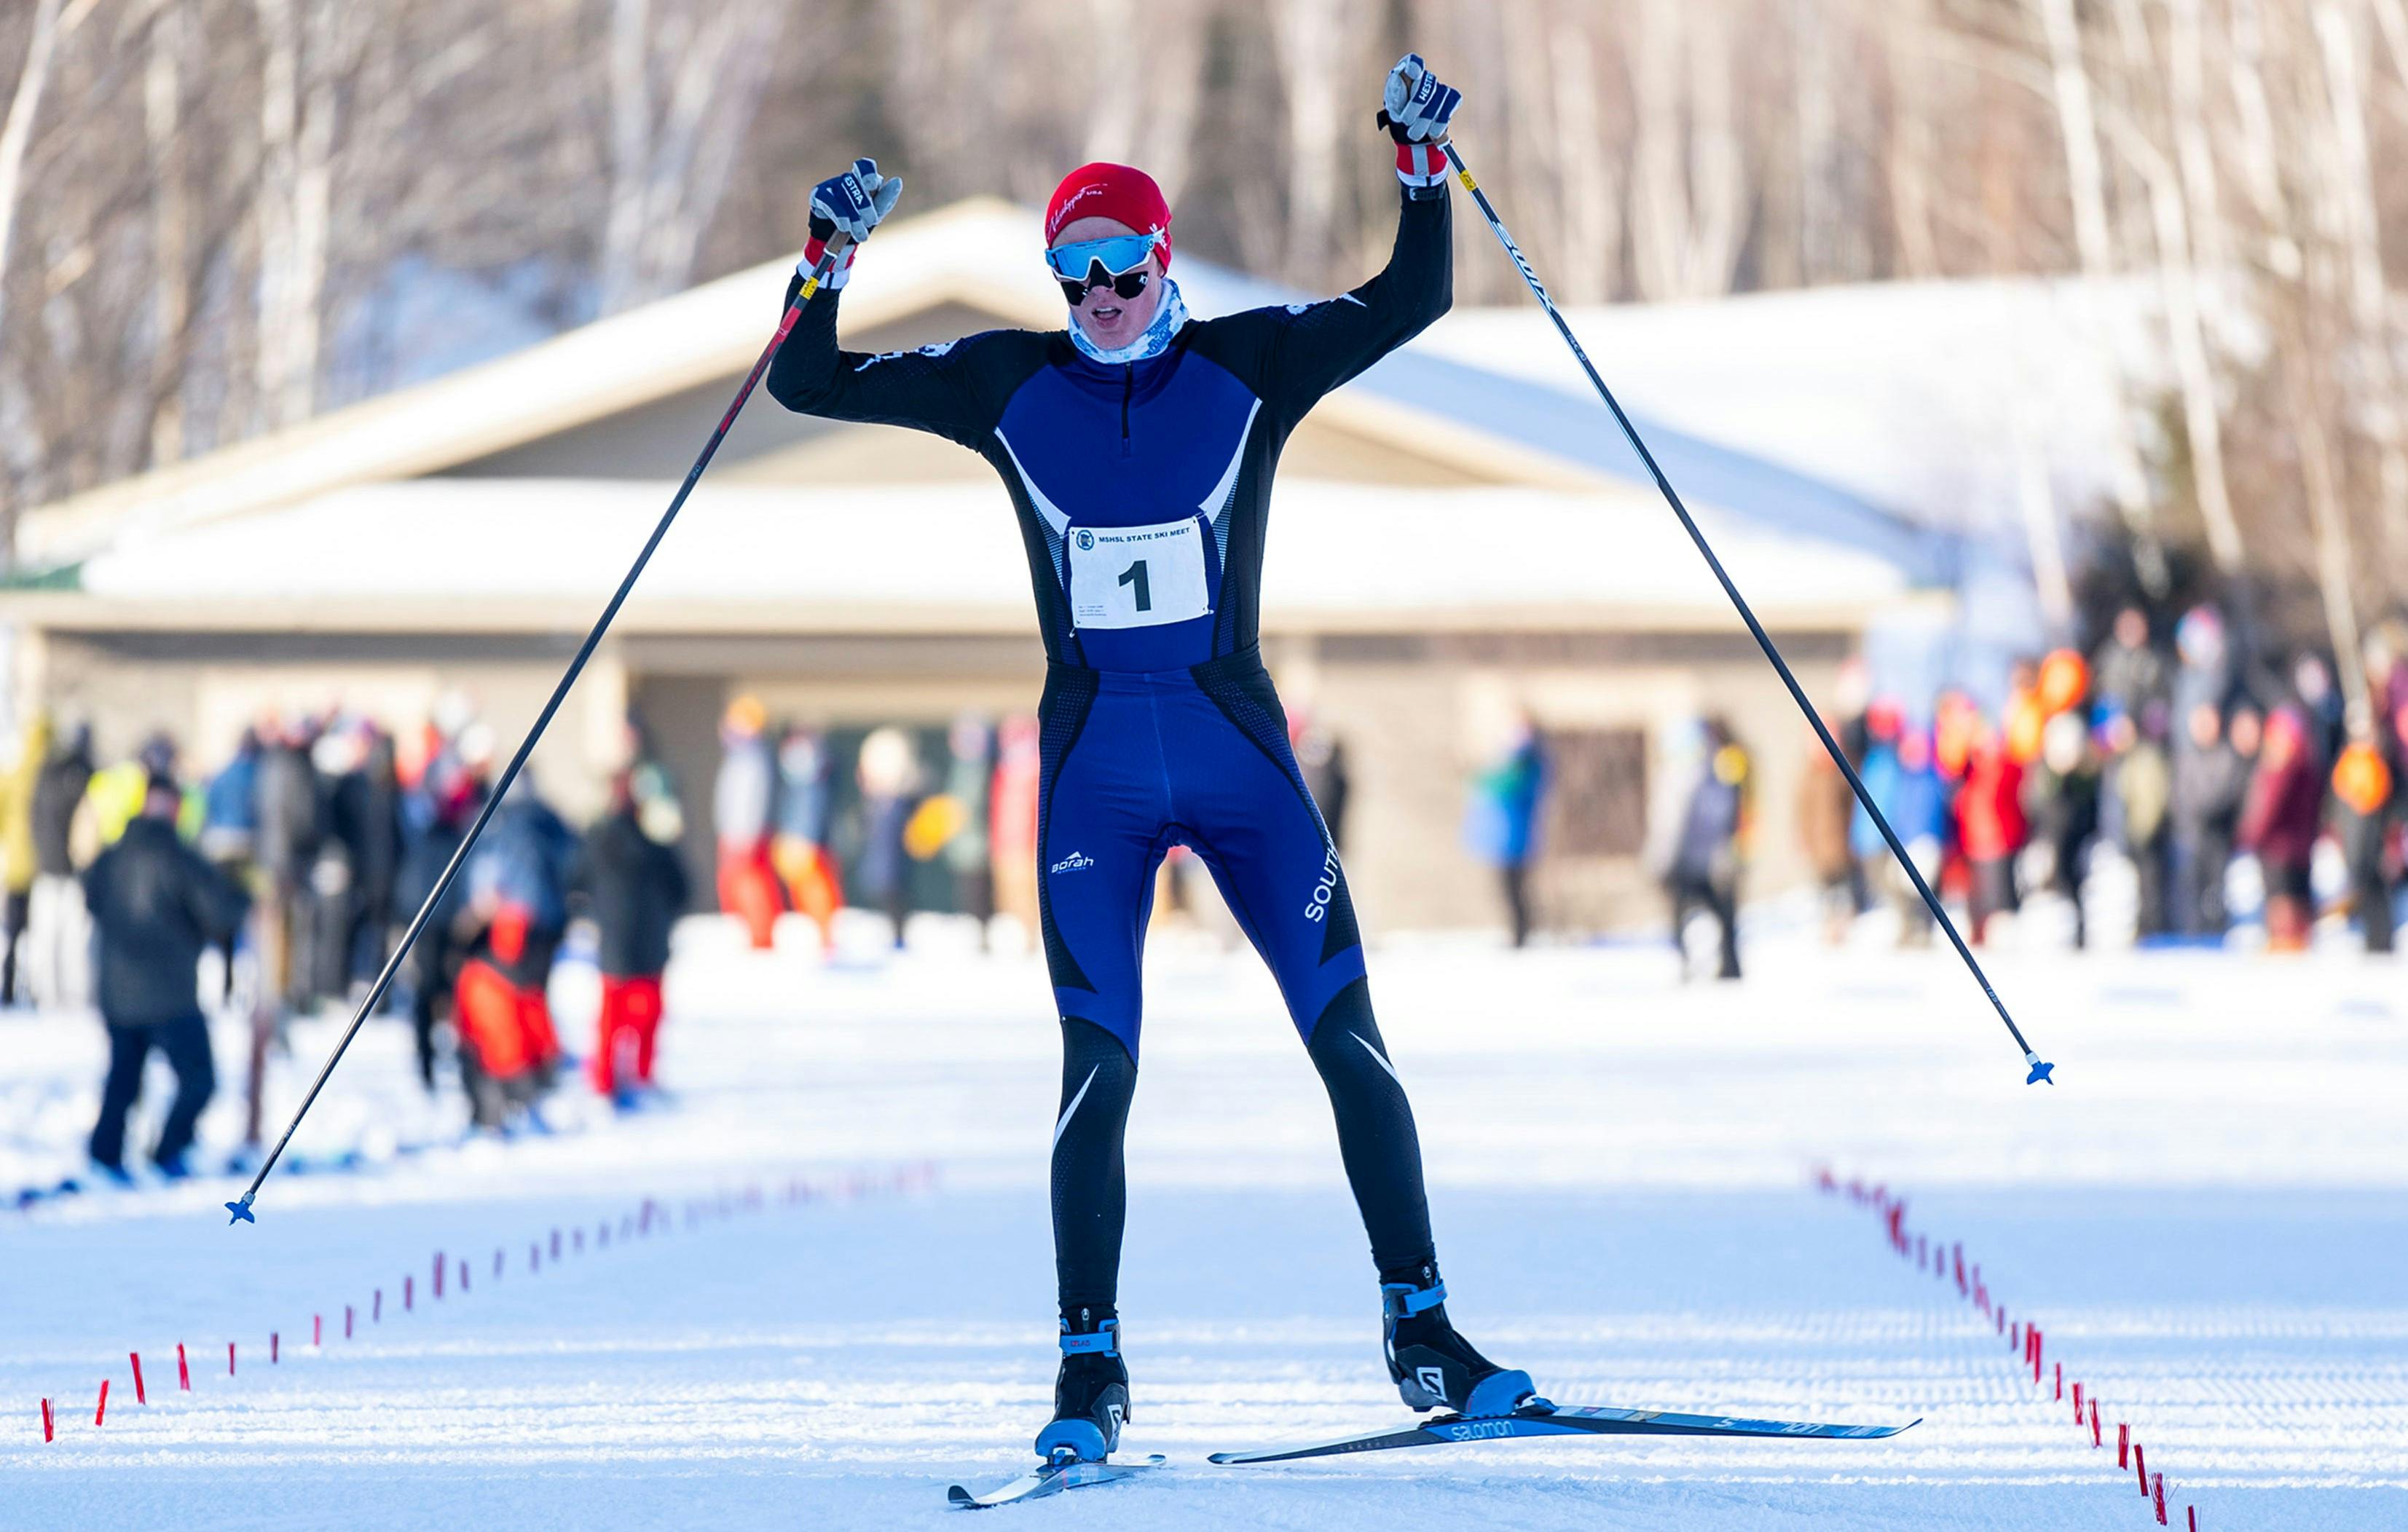 Cooper sought fun with friends in Nordic ski racing, and he certainly found it